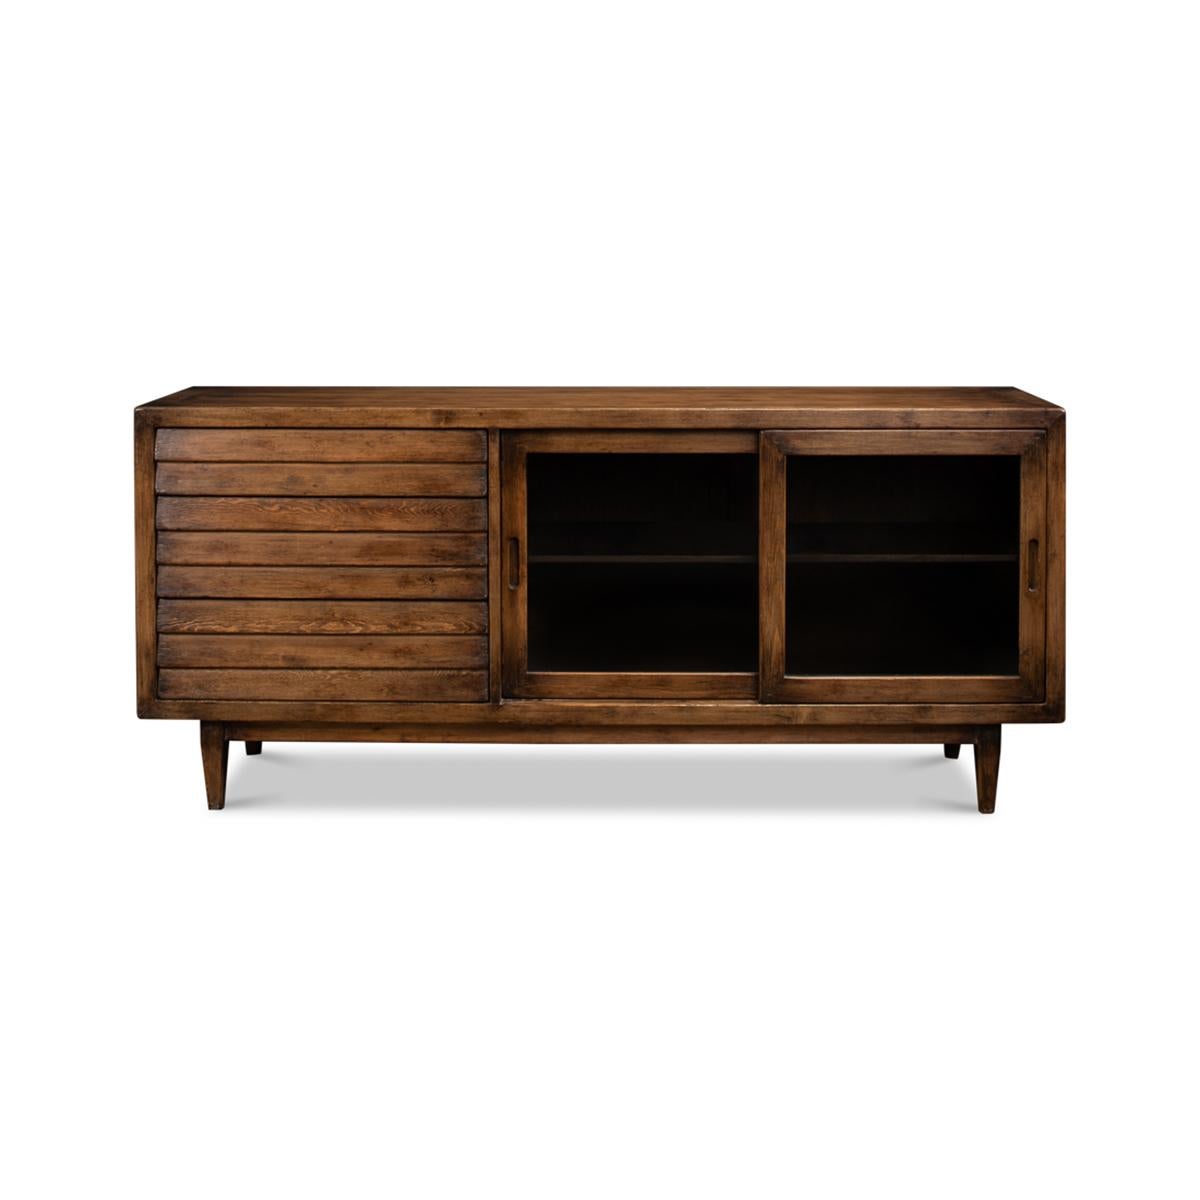 Rustic Reclaimed Pine Credenza with a brown transitional finish, to the right two sliding glass doors and to the left three drawers, all raised on square tapered legs.

Dimensions: 72